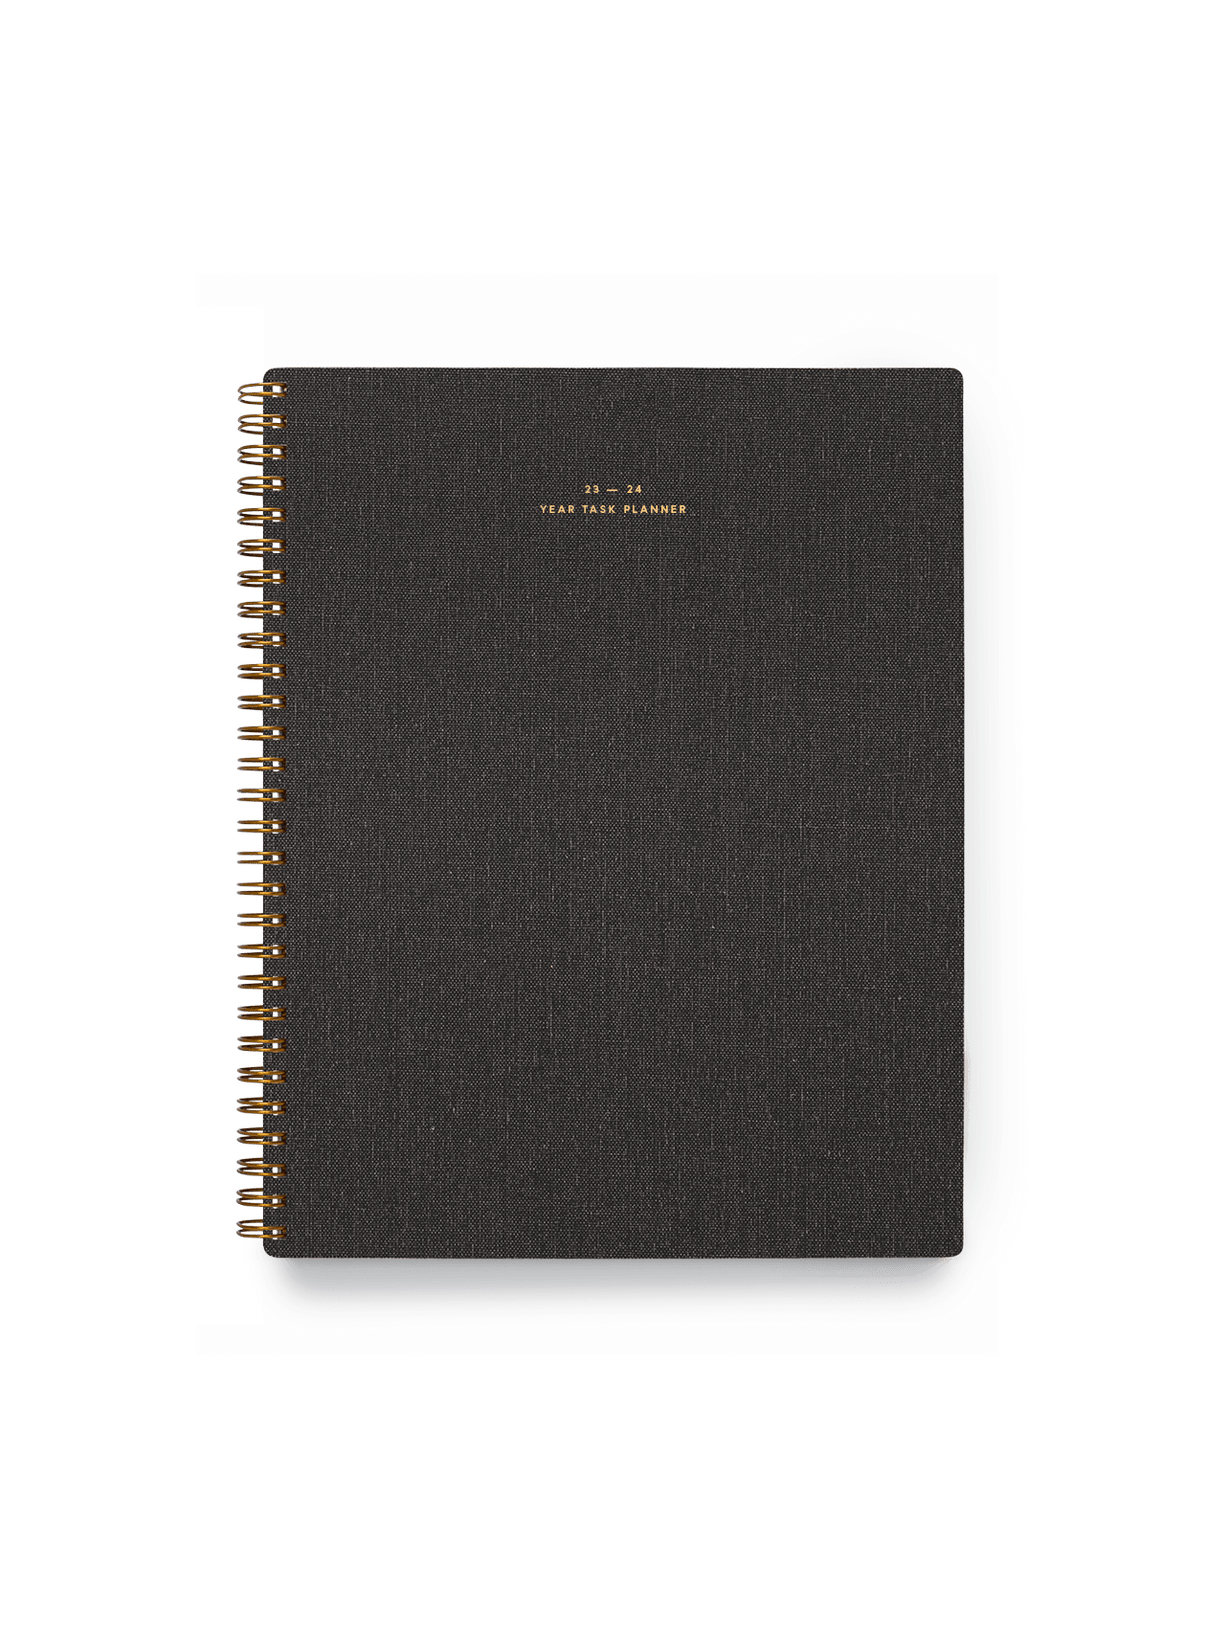 The Appointed 23-34 Year Task Planner in Charcoal Gray with brass wire-o binding, foil details, and textured bookcloth covers || Charcoal Gray